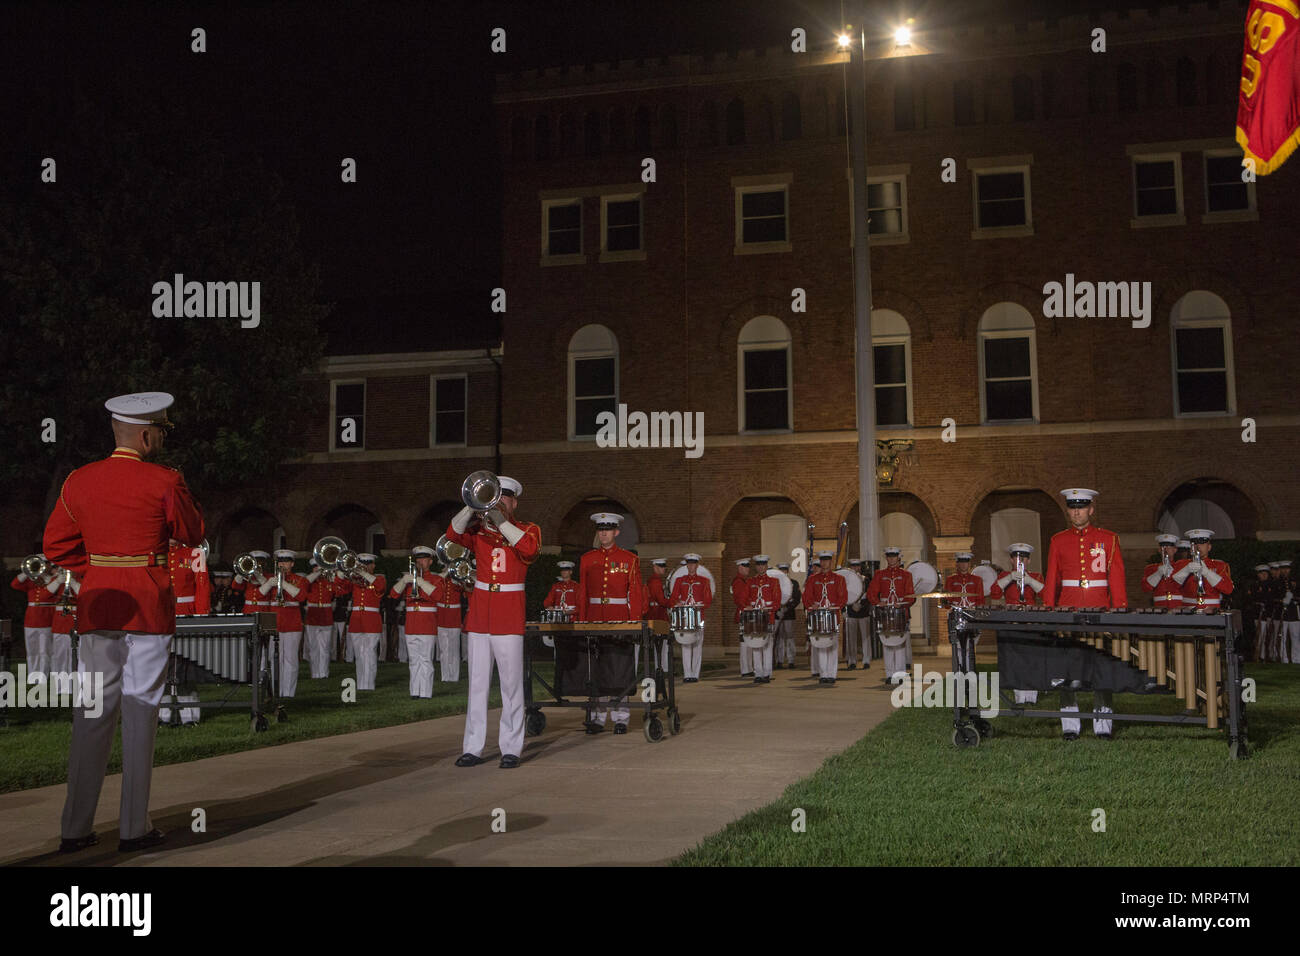 U.S. Marines with the U.S. Marine Drum and Bugle Corps perform during an evening parade at Marine Barracks Washington, Washington, D.C., June 9, 2017. Evening parades are held as a means of honoring senior officials, distinguished citizens and supporters of the Marine Corps. (U.S. Marine Corps photo by Lance Cpl. Stephon L. McRae) Stock Photo